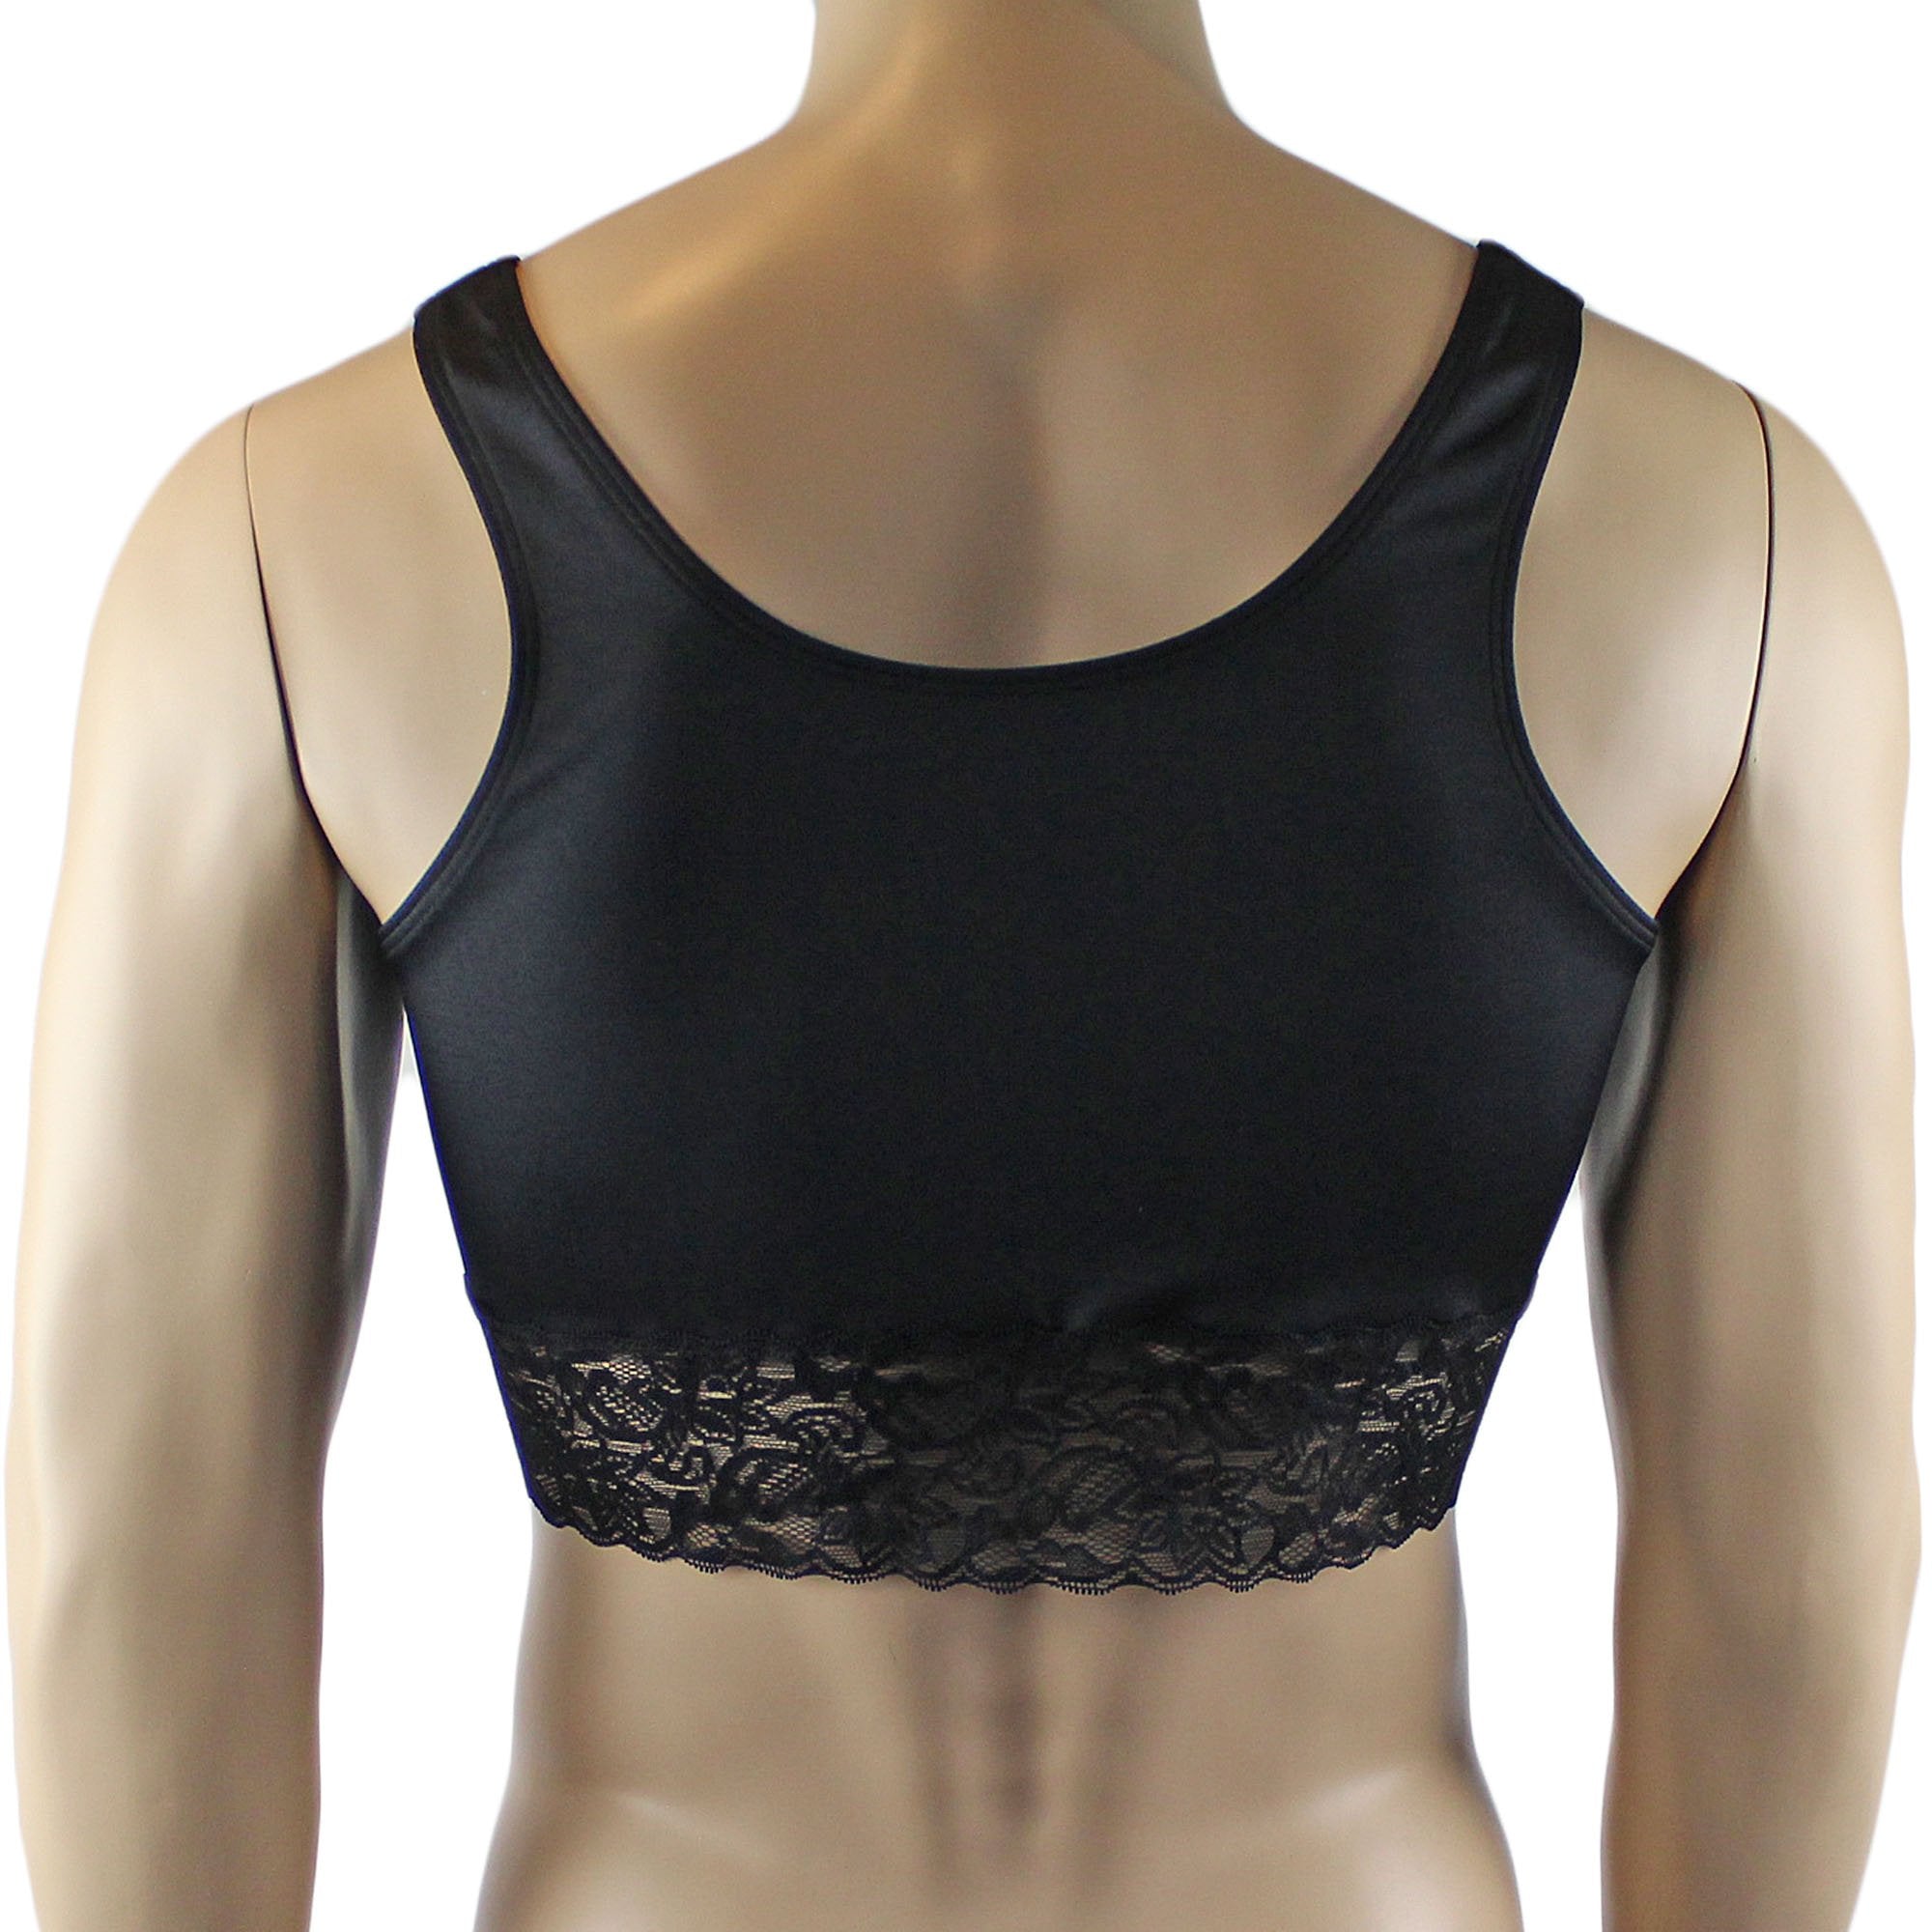 Male Penny Lingerie Bra Camisole Top with Lace Black